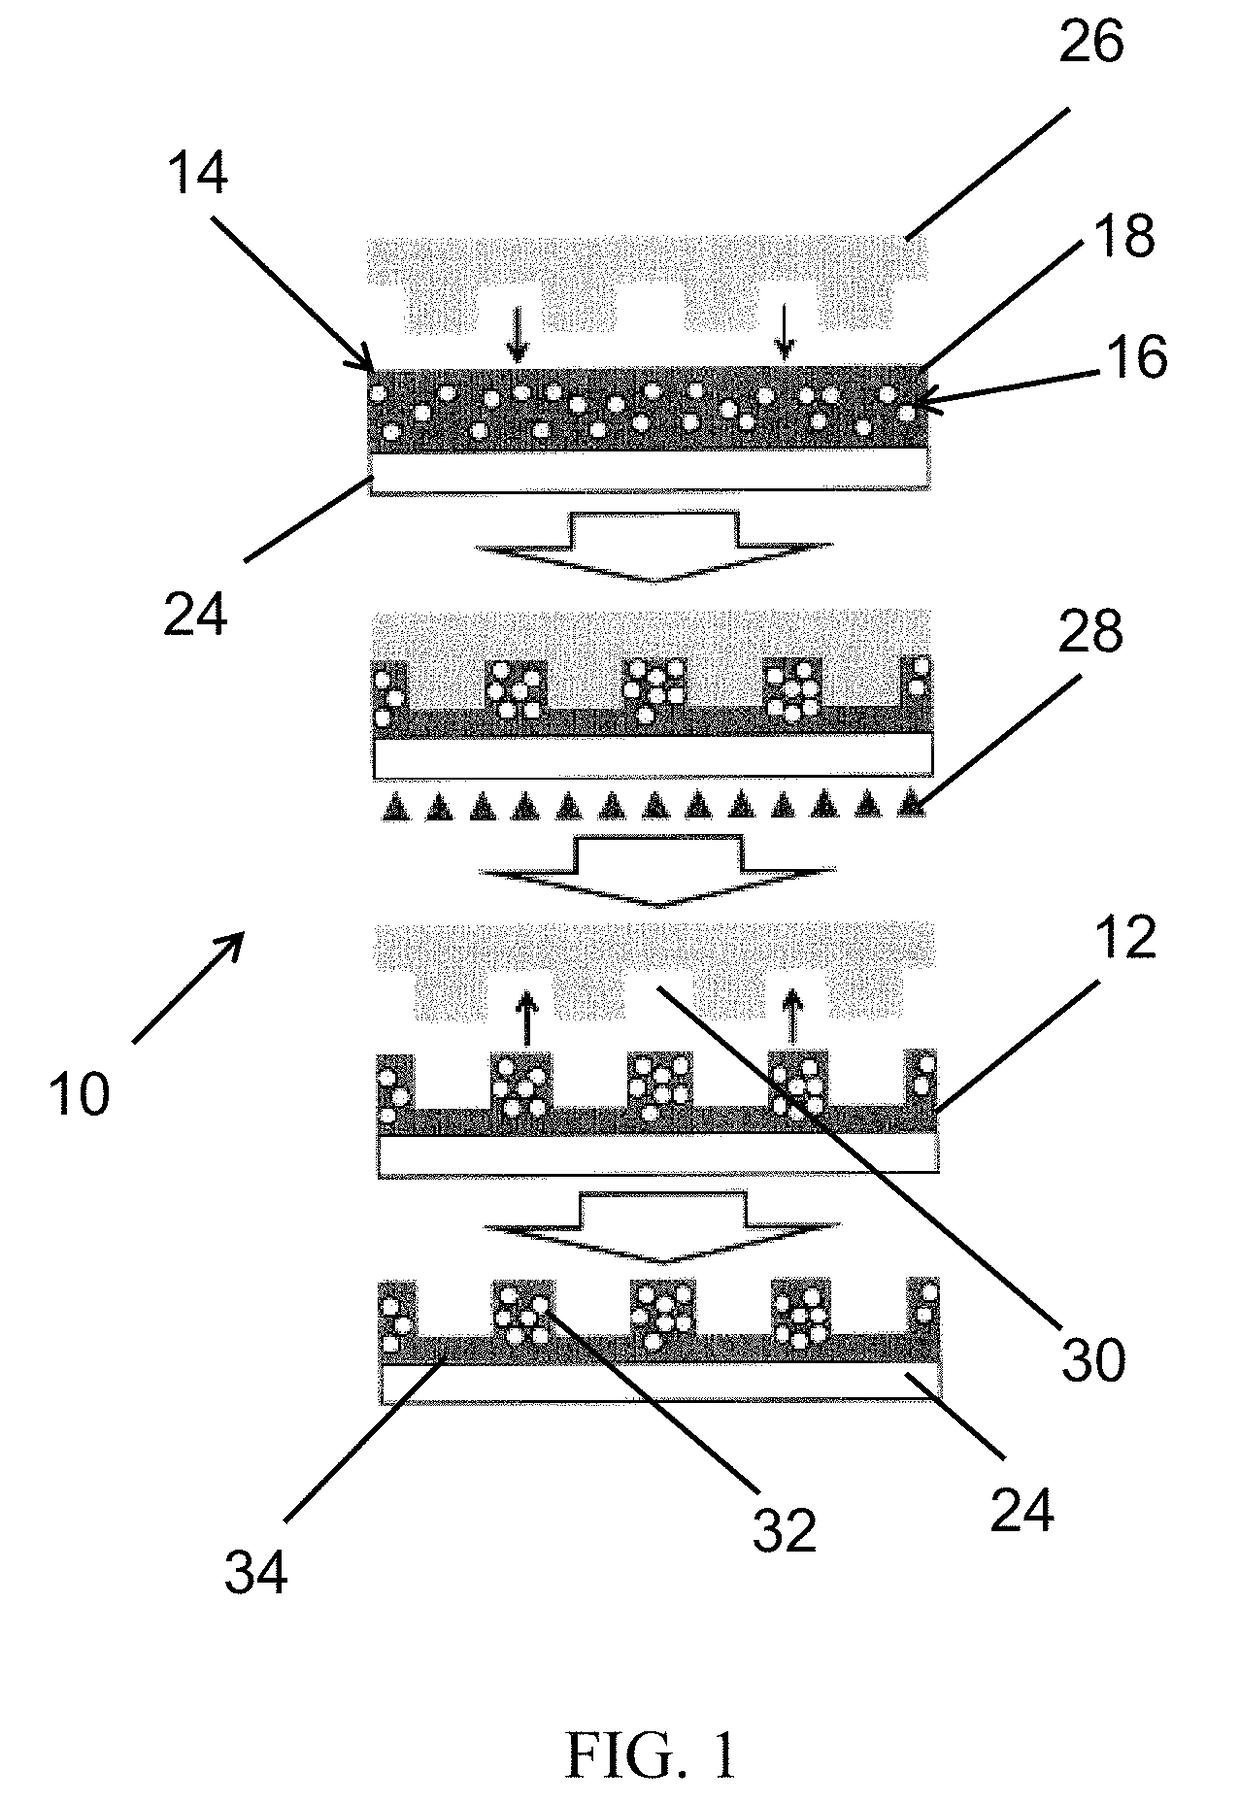 Fabrication of patterned nanoparticle structures